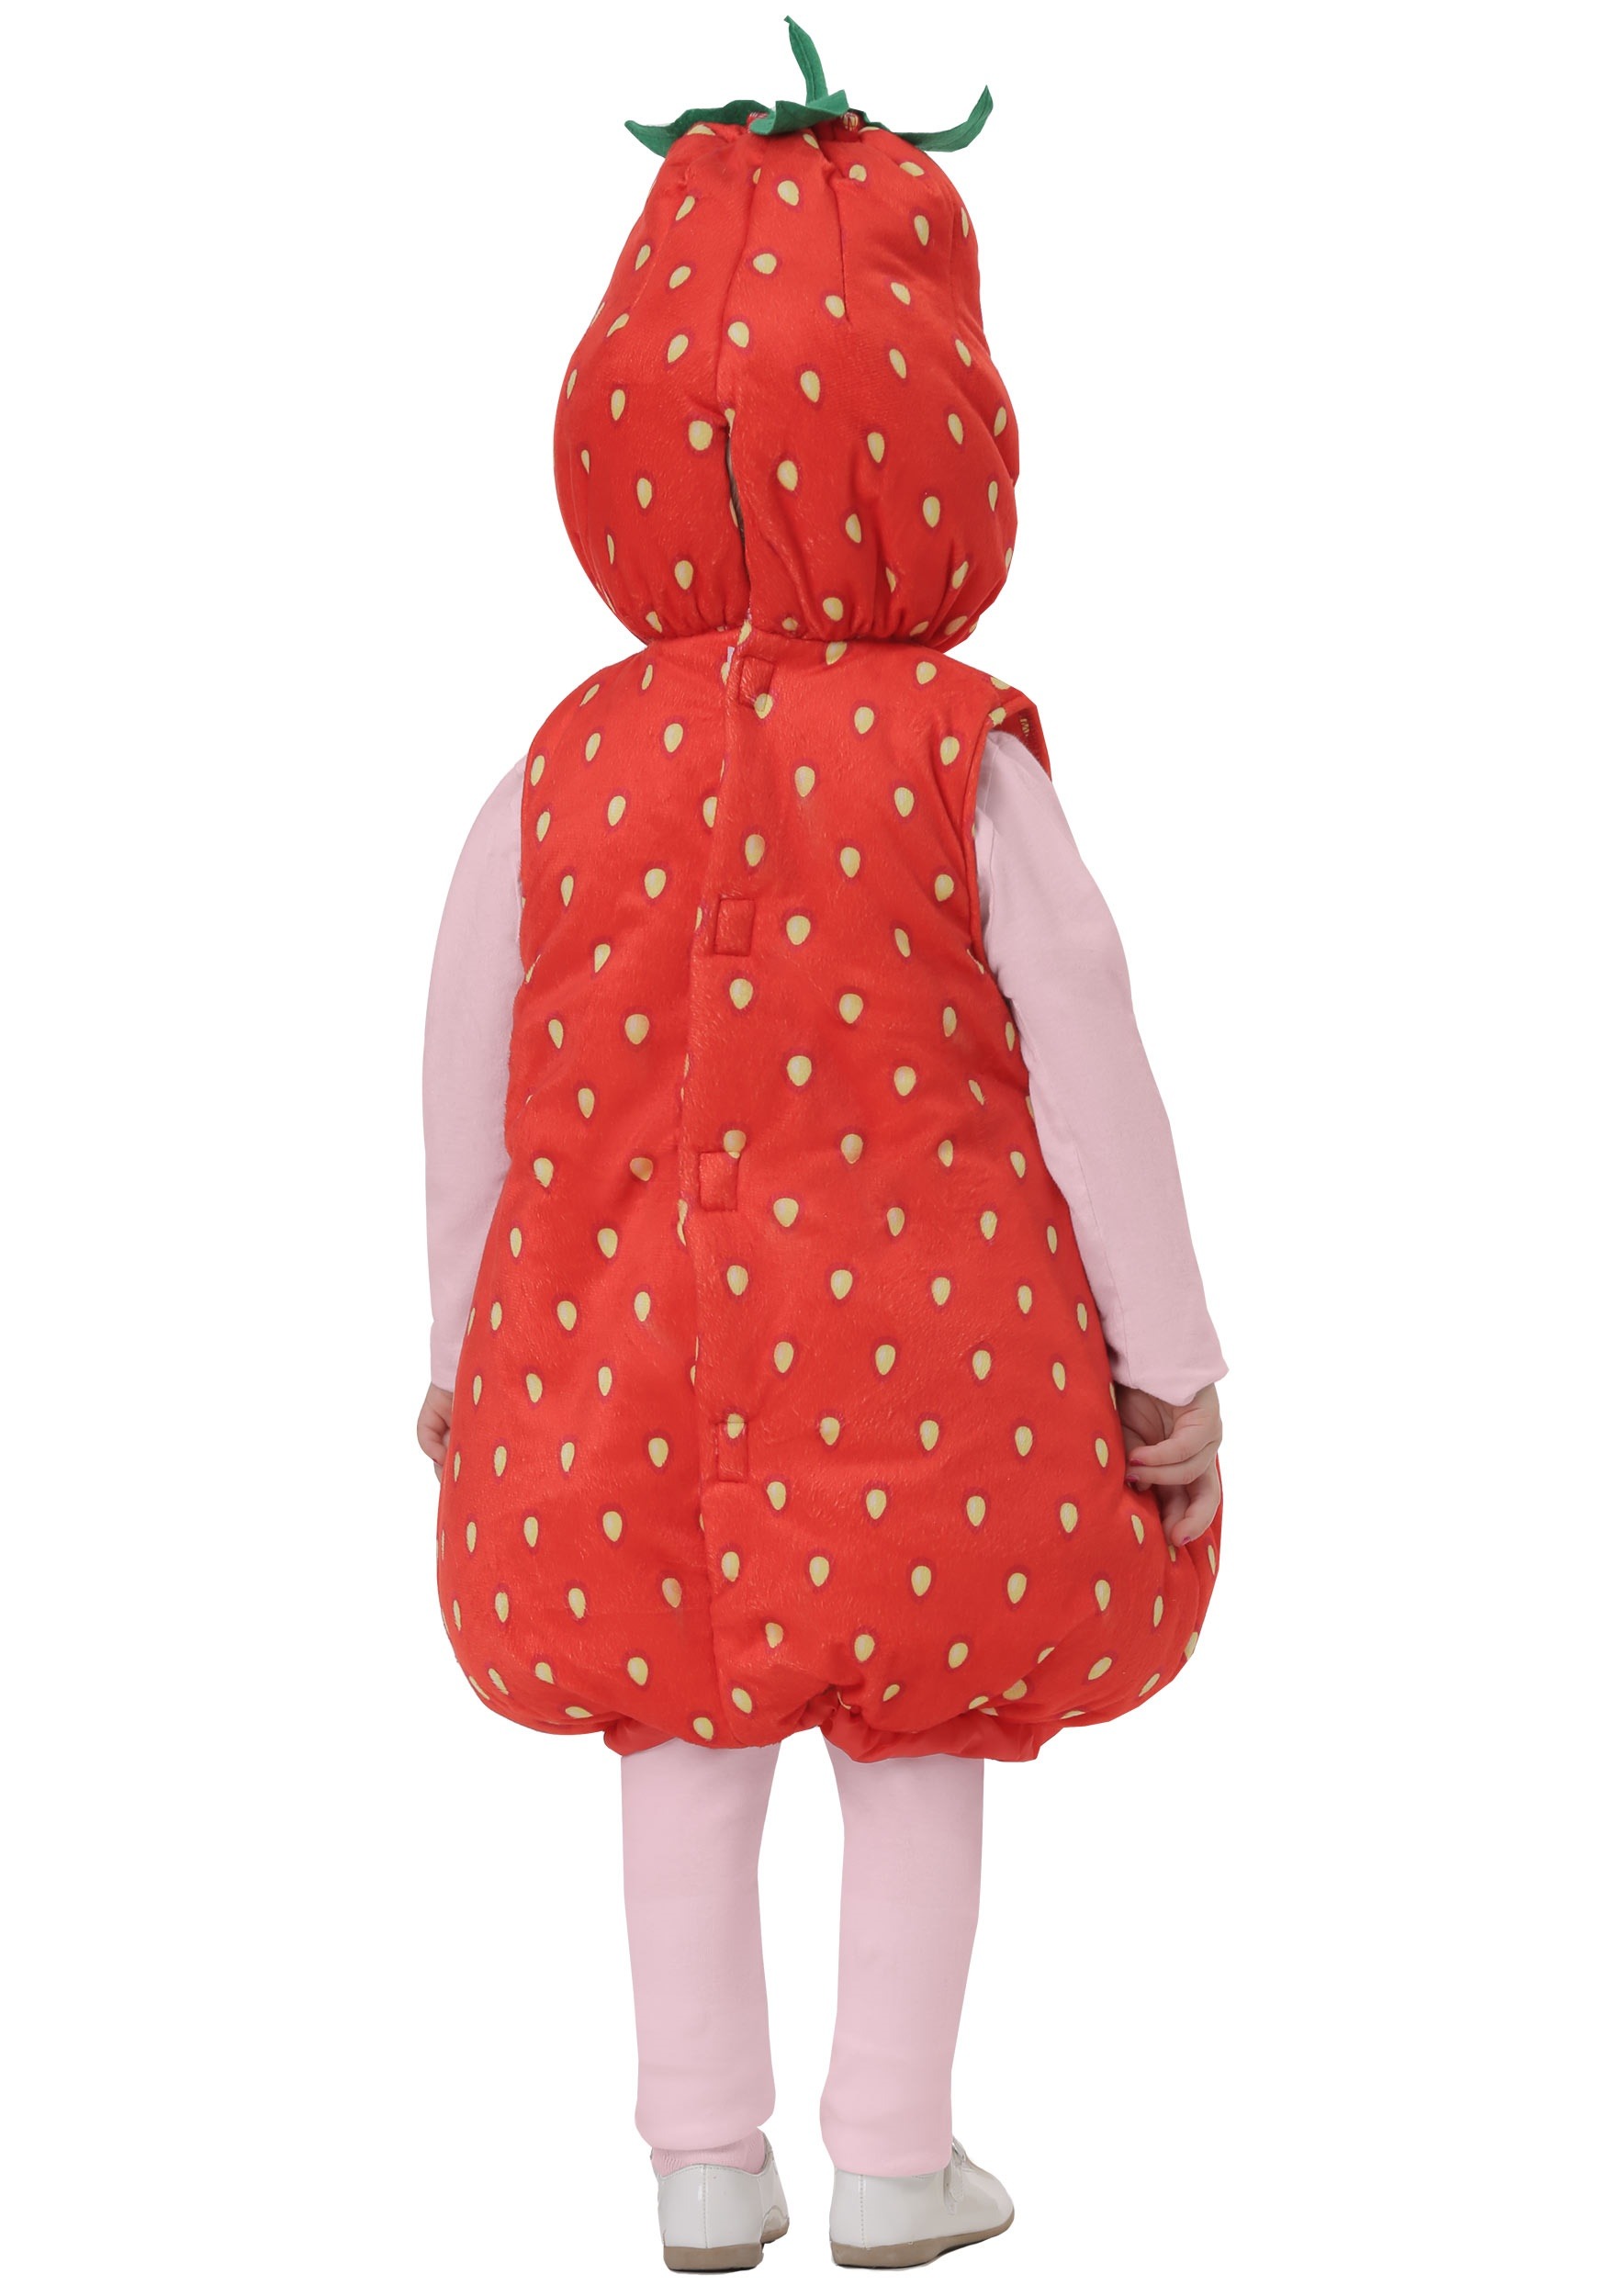 Strawberry Bubble Costume For An Infant/Toddler